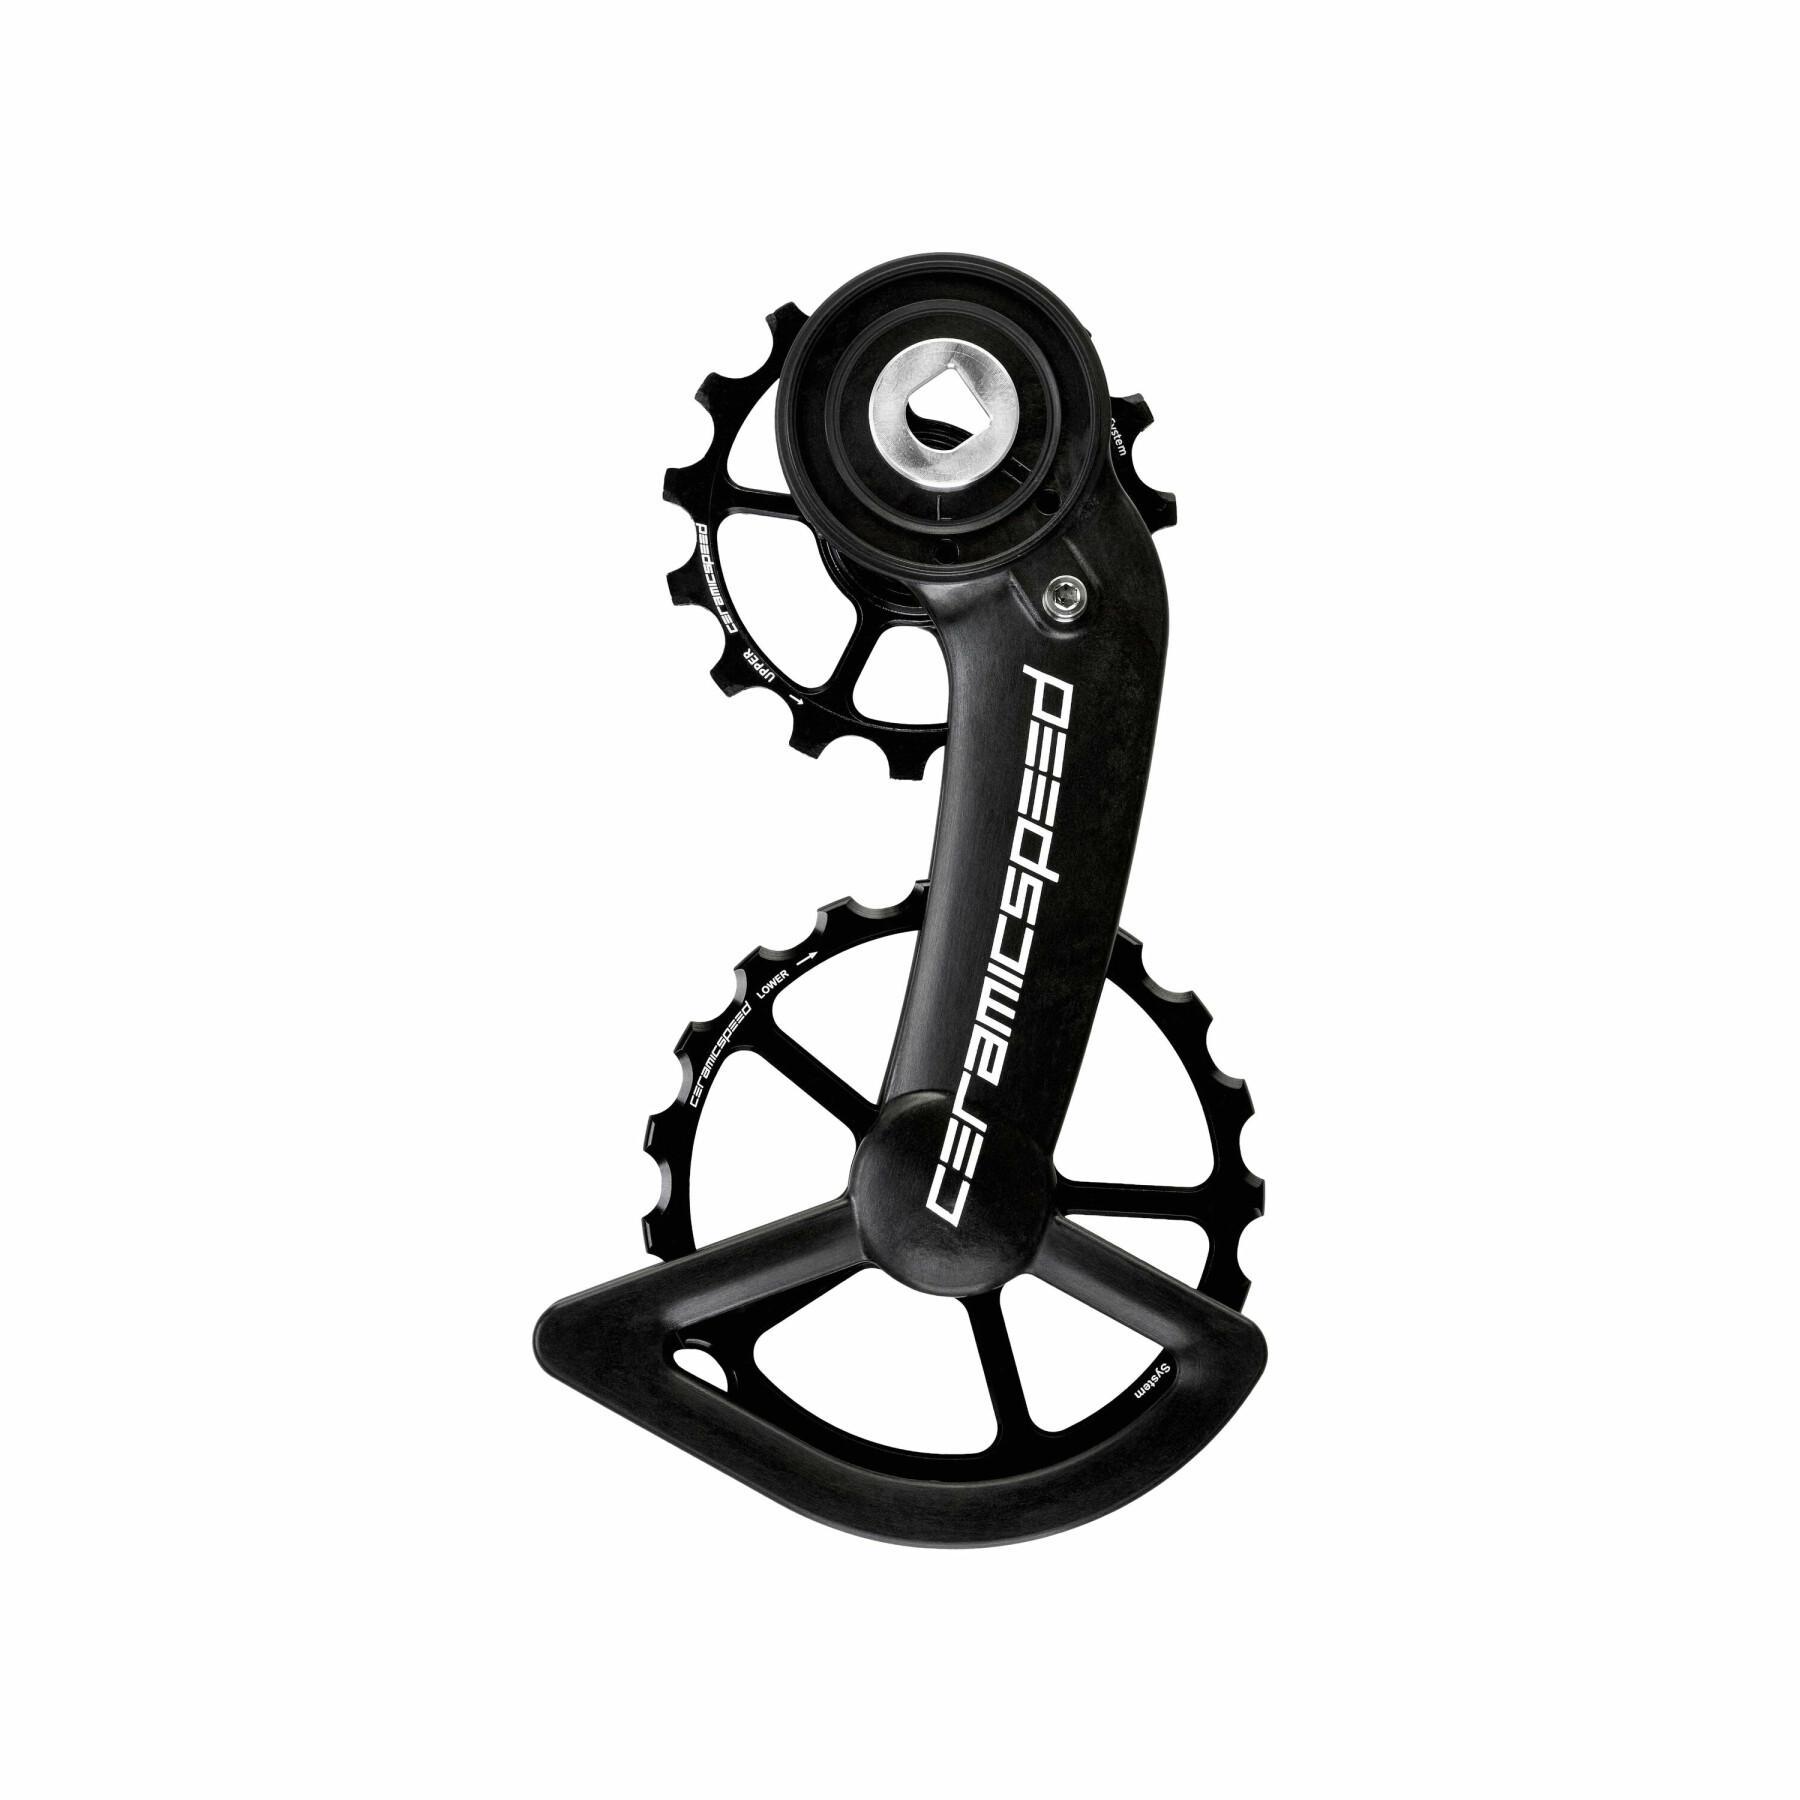 Chape CeramicSpeed OSPW coated Sram red/force axs